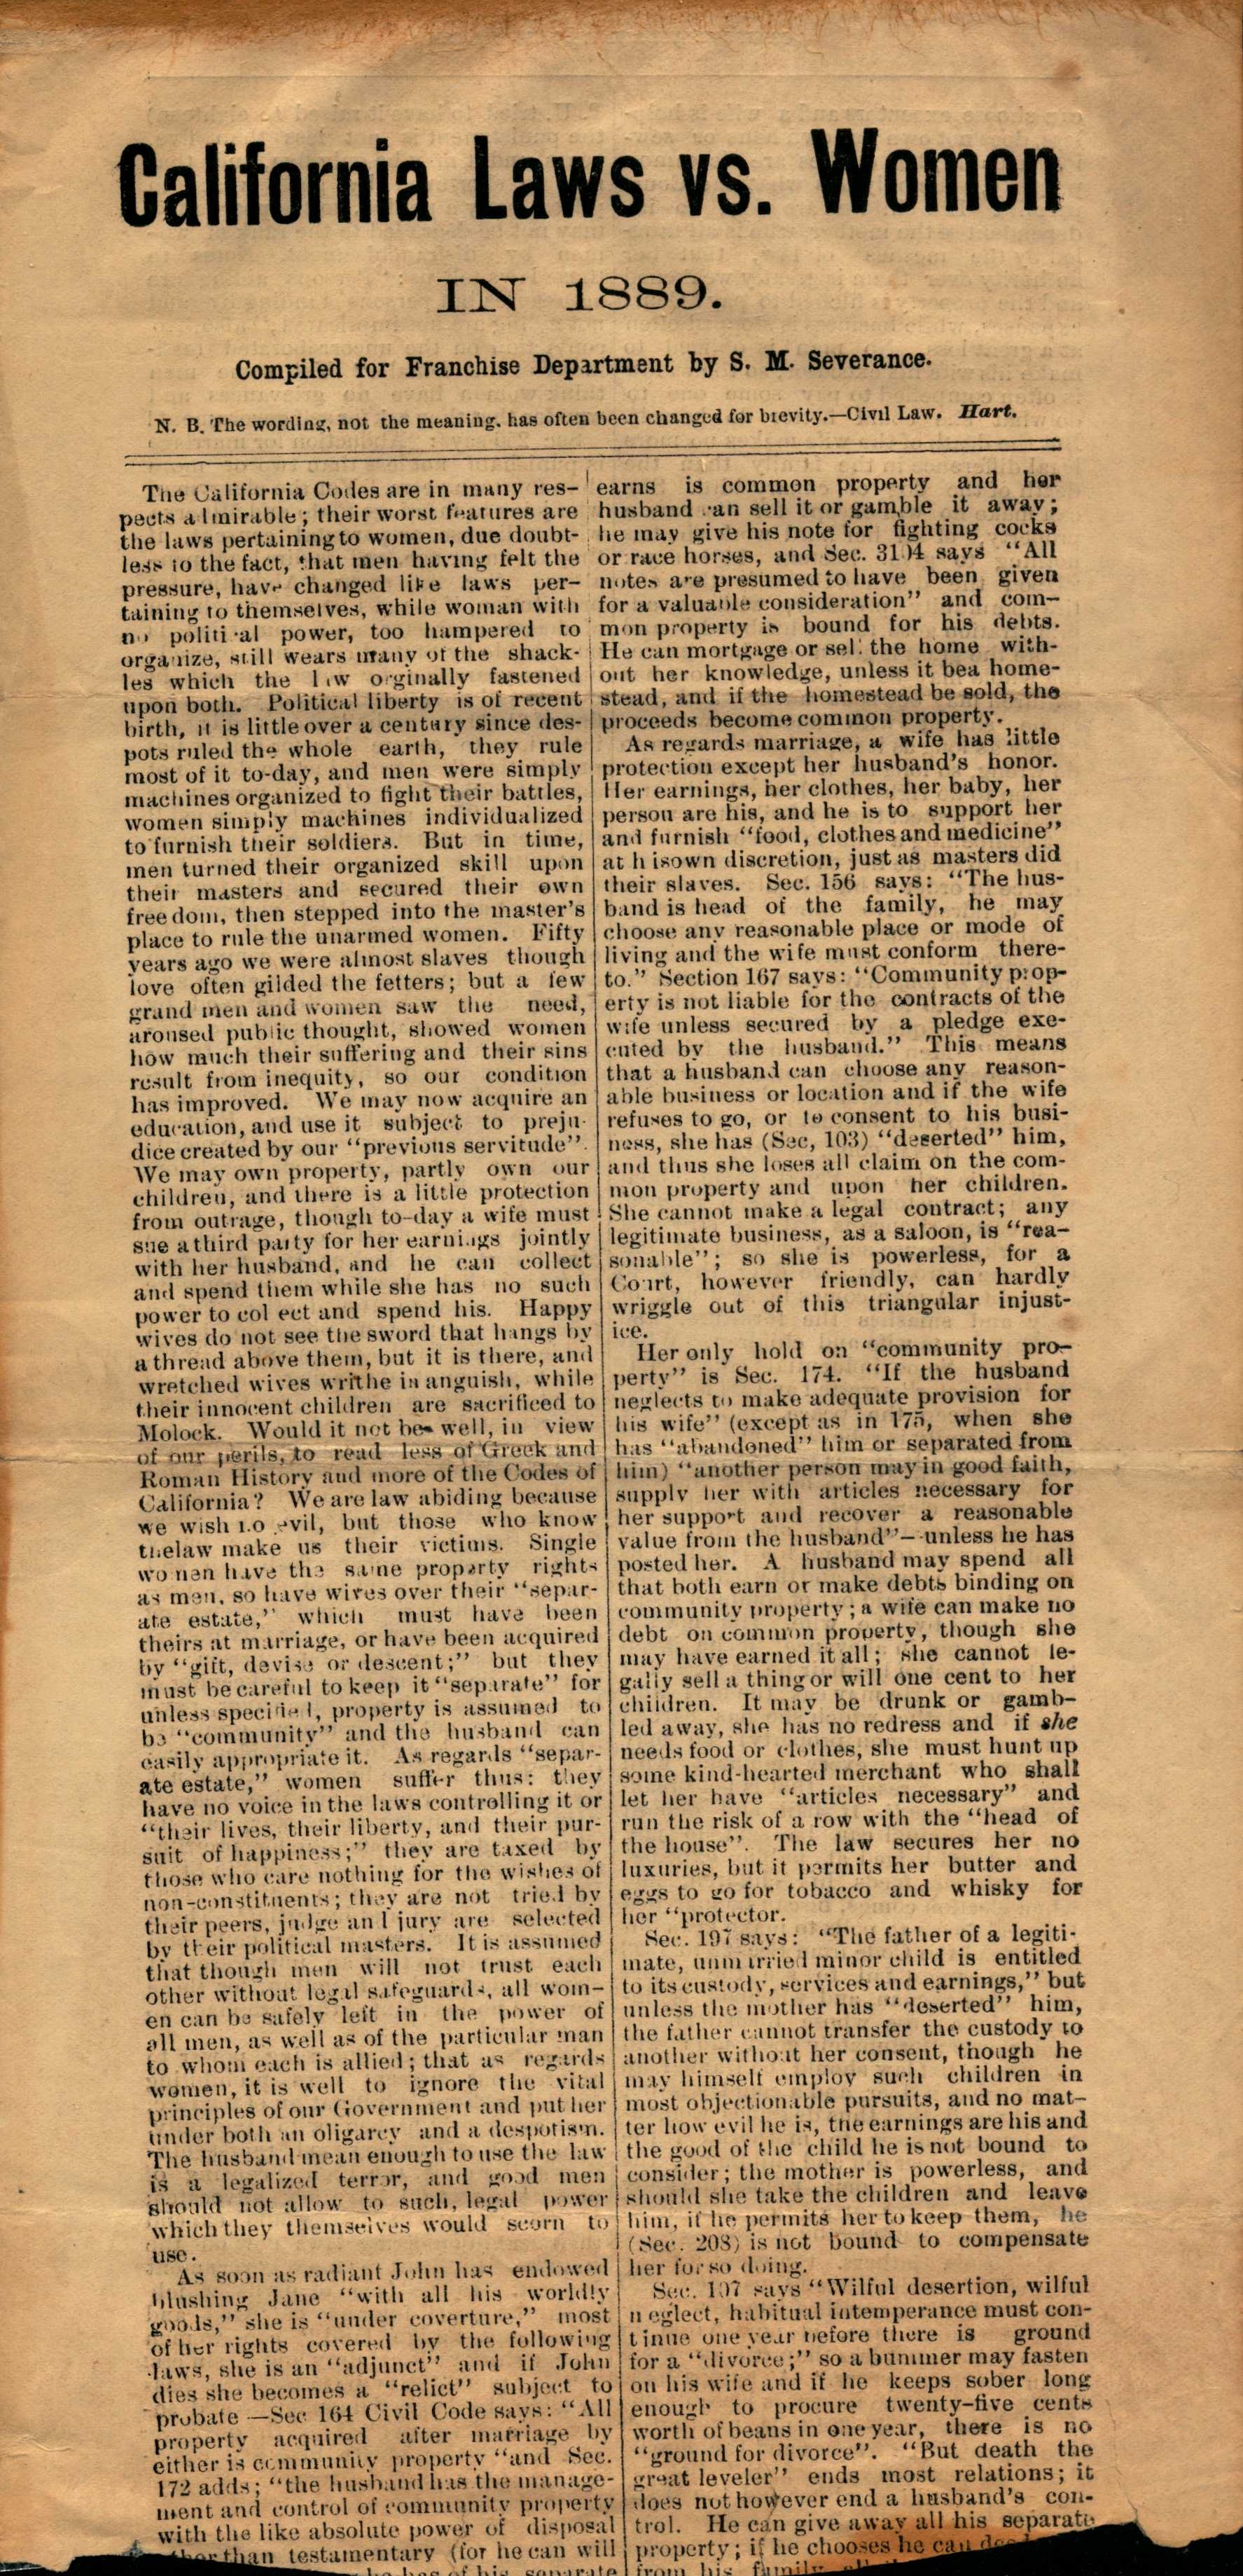 Shows the title and first page of the paper.